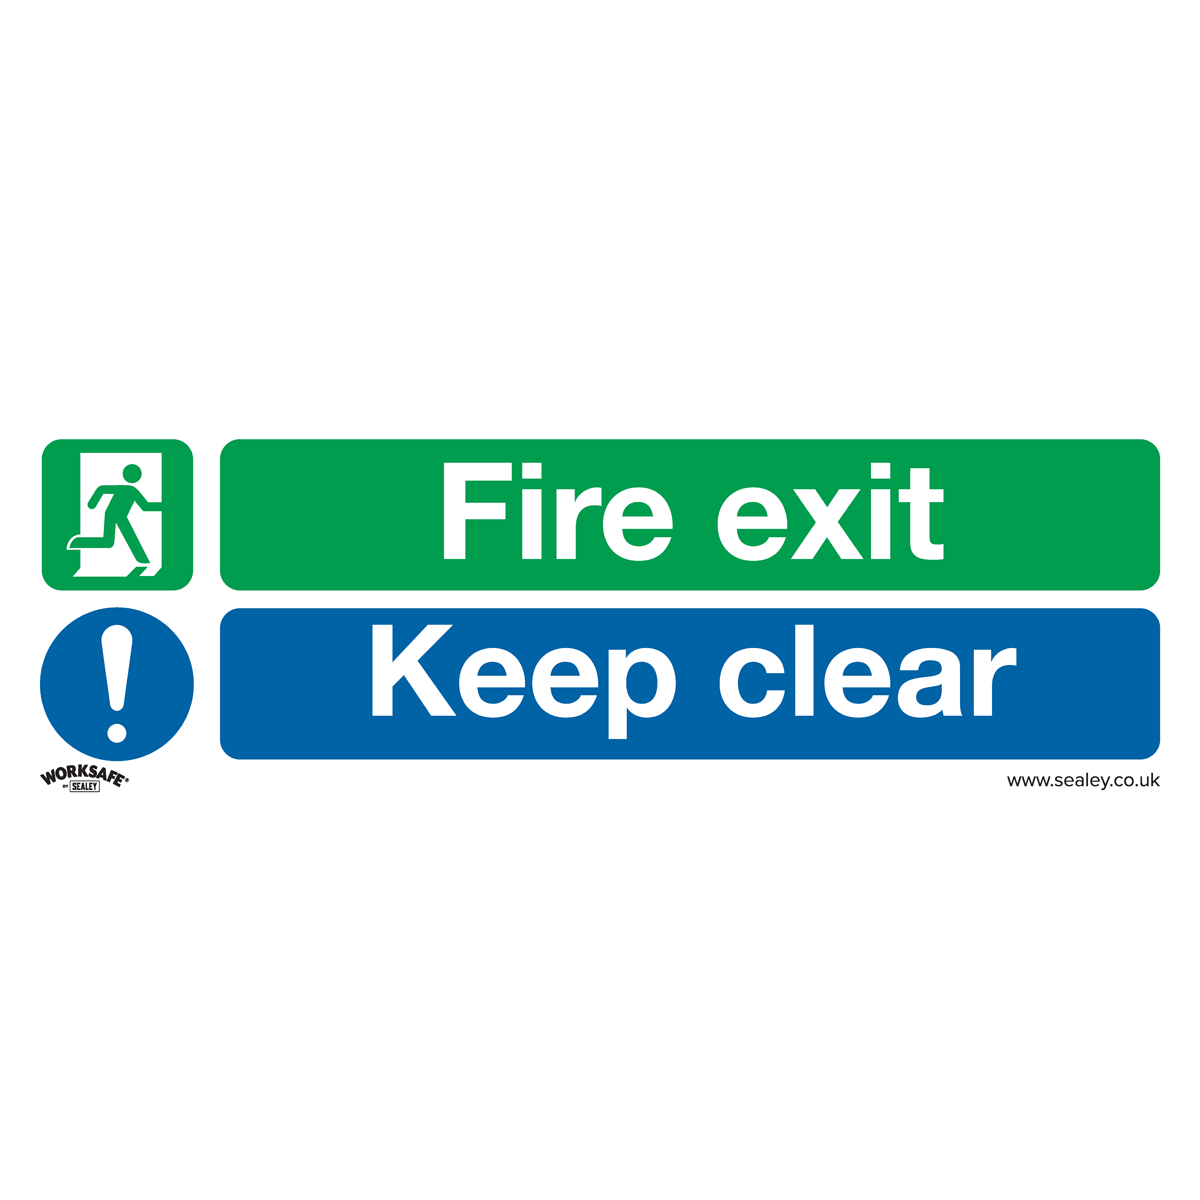 Safe Conditions Safety Sign - Fire Exit Keep Clear - Rigid Plastic - Pack of 10 - SS18P10 - Farming Parts